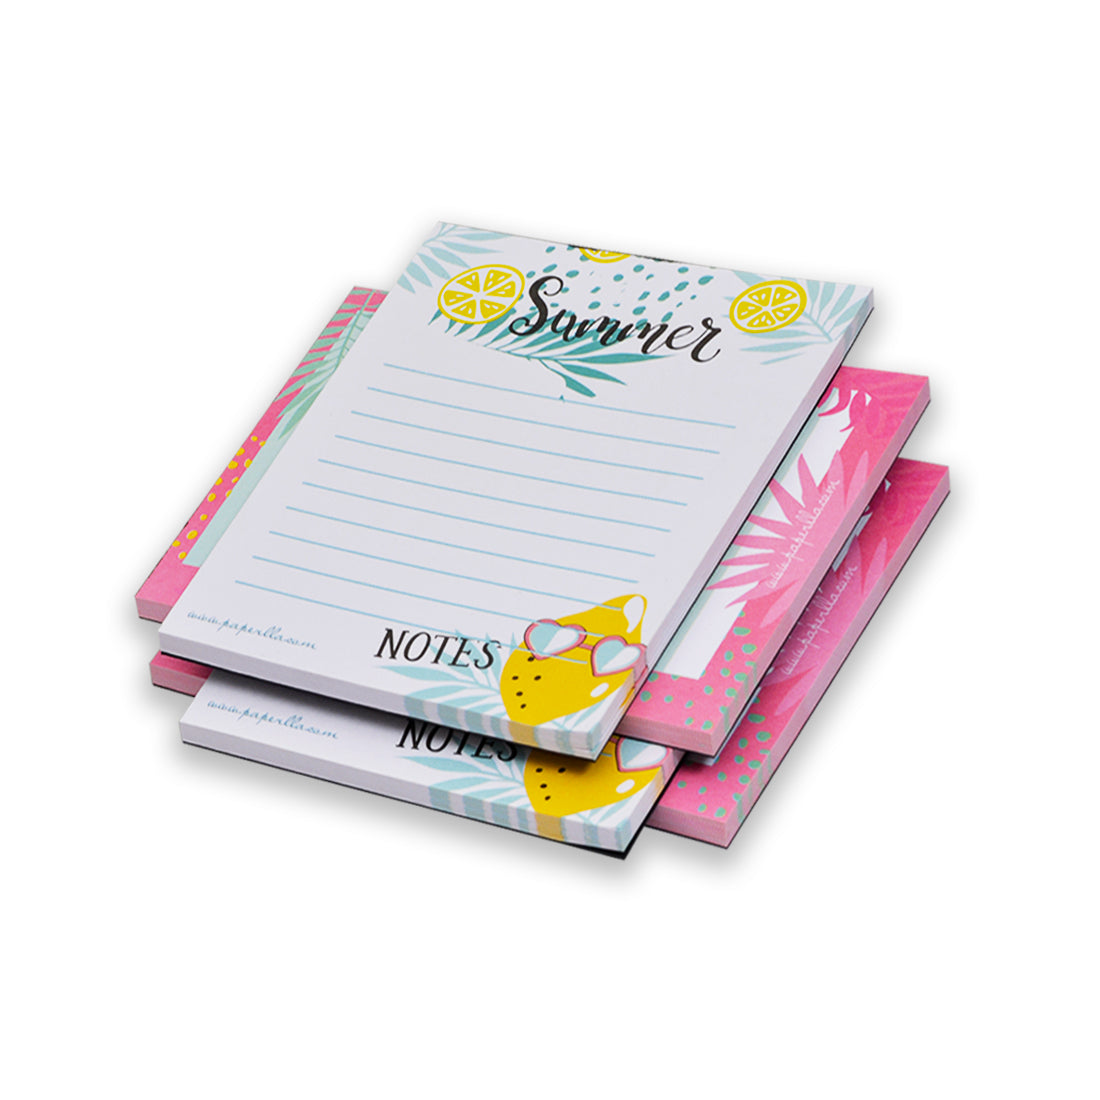 MEMO PADS NOTES PLANNER, TO DO LSIT DIARY UNICORN NOTEPADS FOR WRITING NOTES, SET OF 4